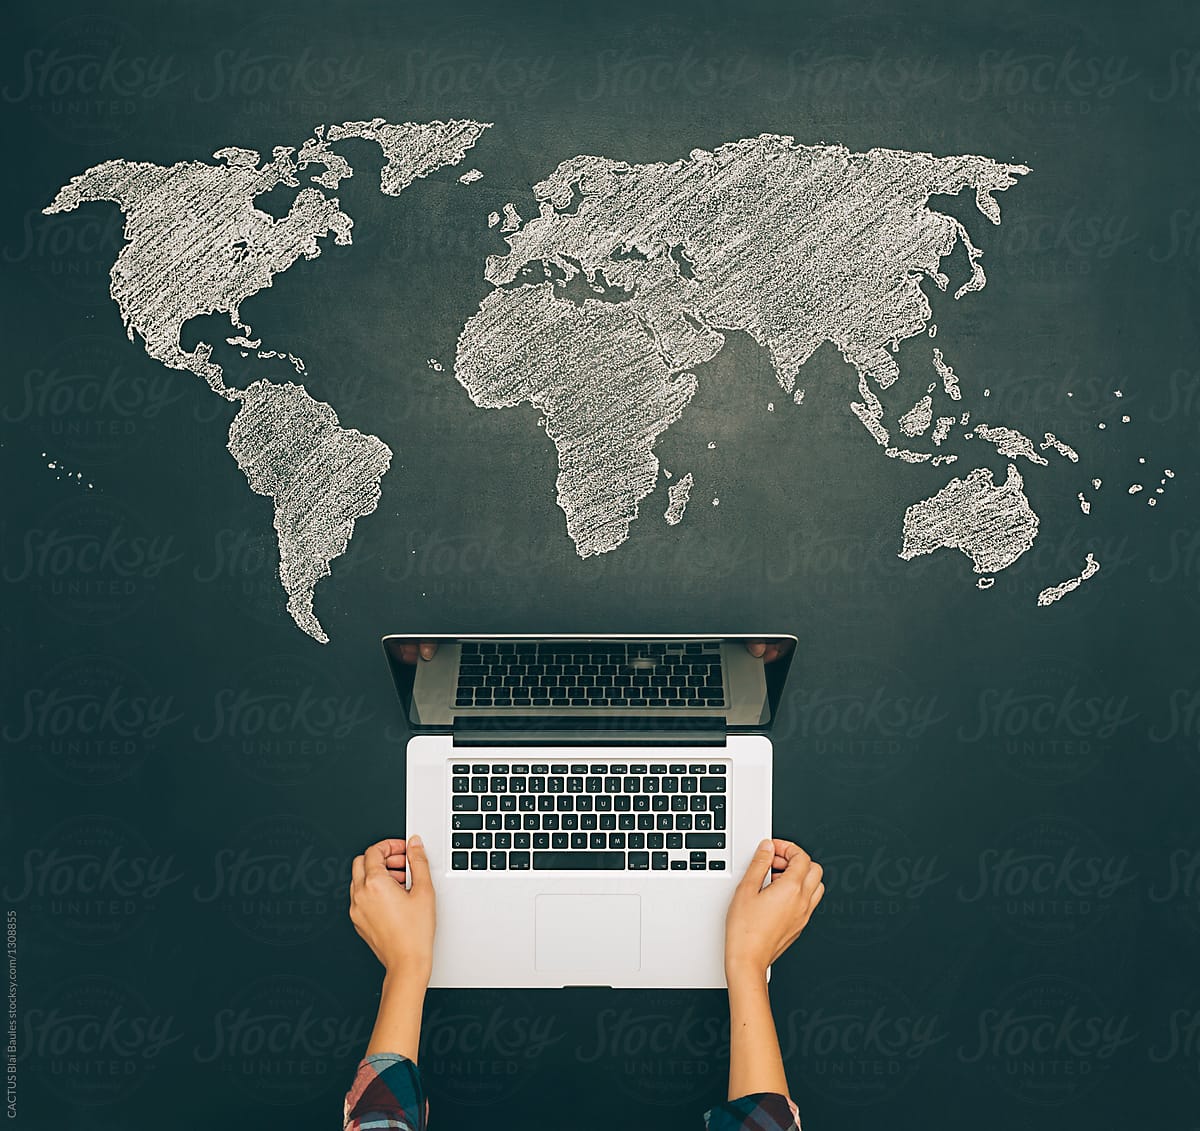 Blackboard with laptop and world map